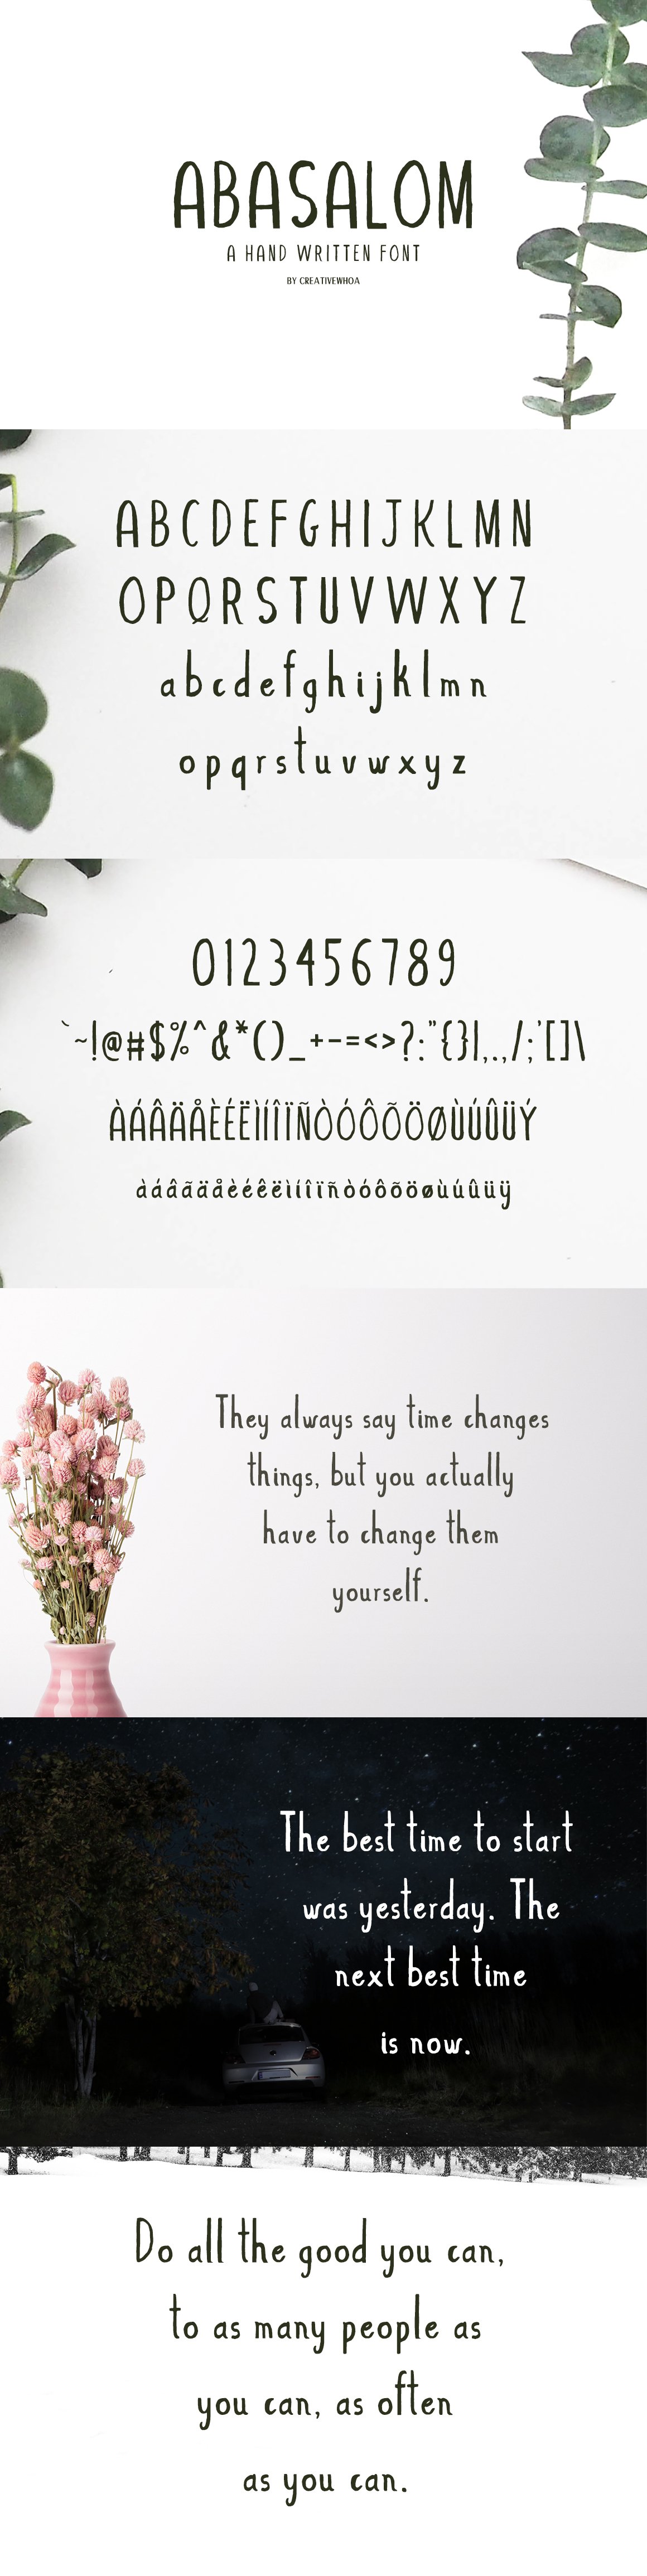 Abasalom | A Handwritten Font cover image.